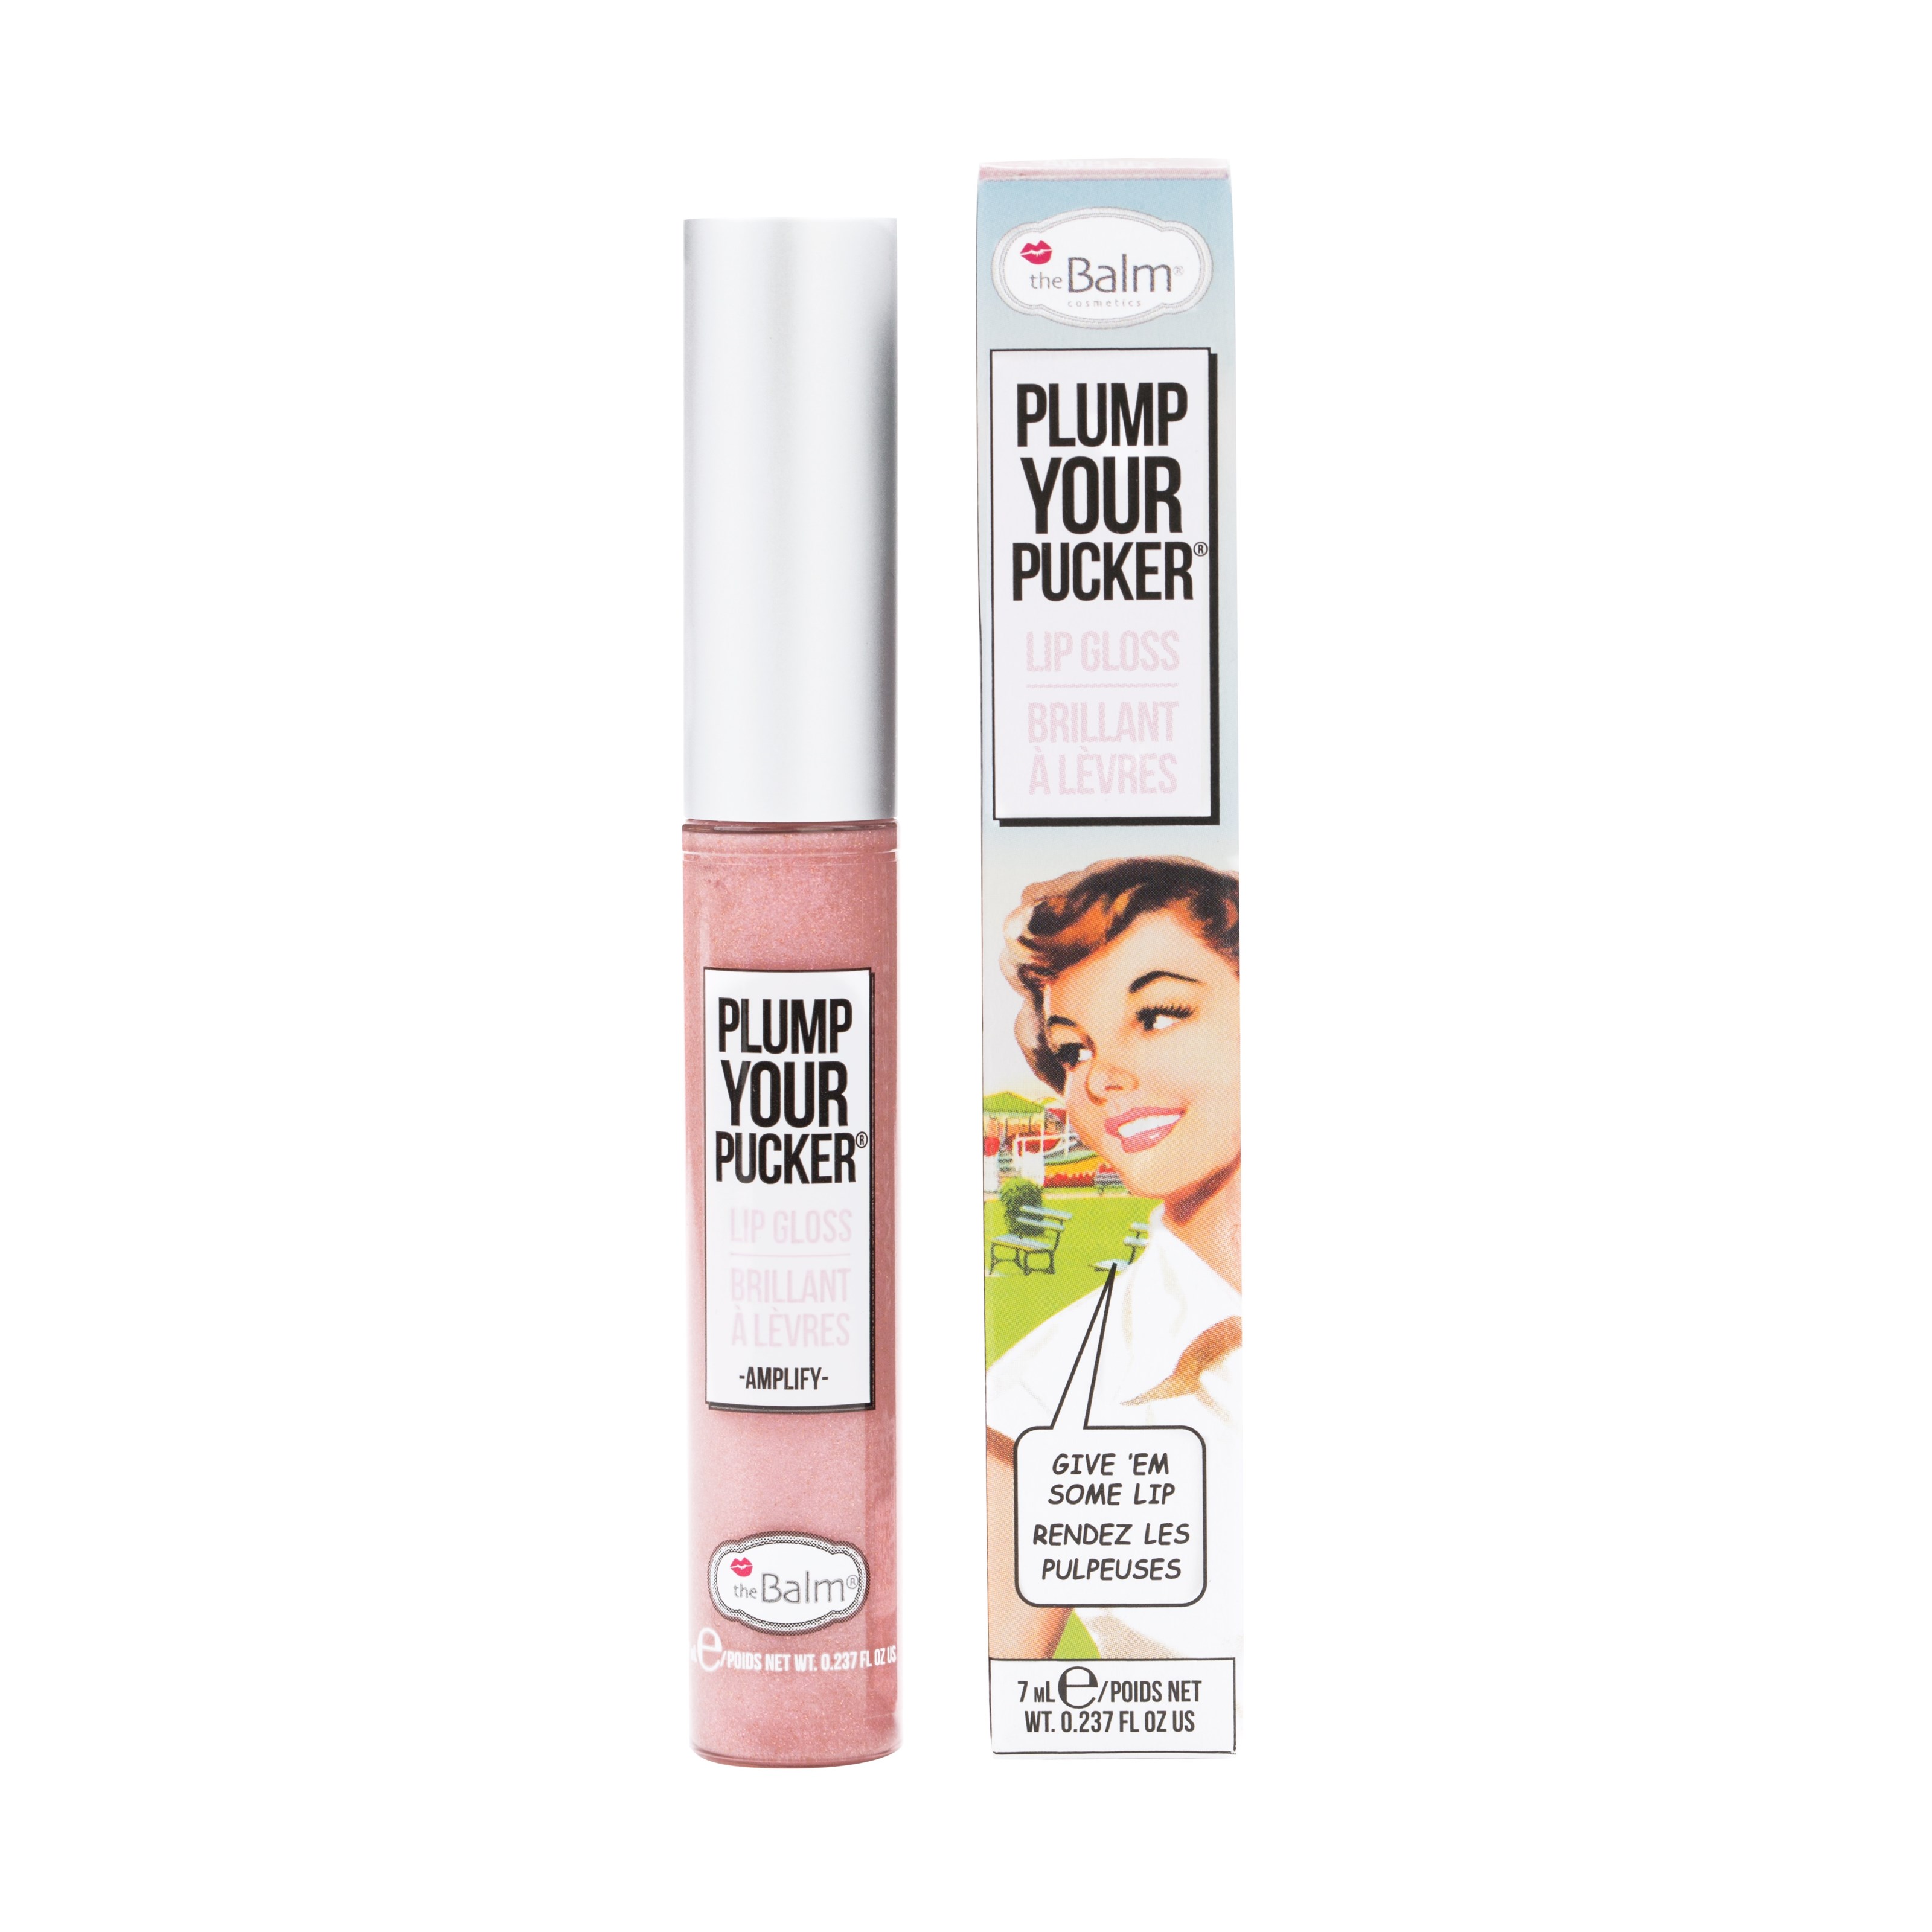 the Balm Plump Your Pucker Amplify